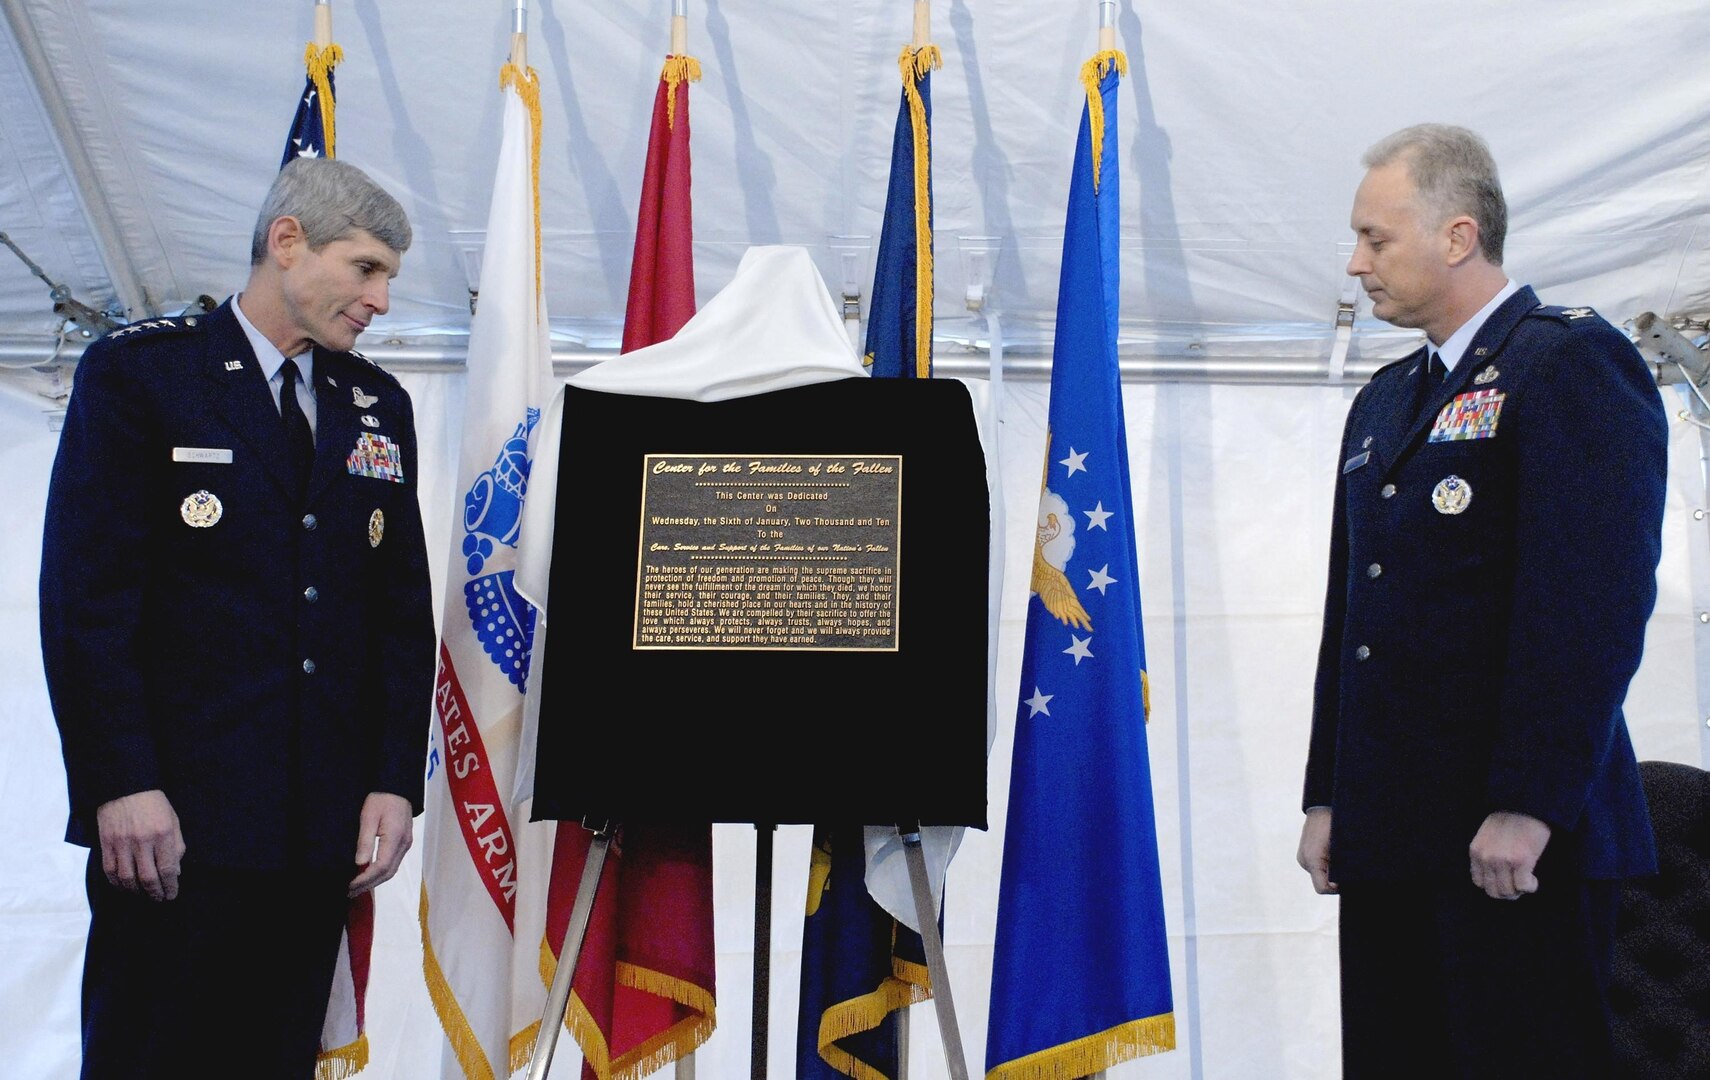 Air Force Chief of Staff Gen. Norton A. Schwartz and Air Force Col. Robert Edmondson, commander of the Air Force Mortuary Affairs Operations Center, read the inscription on the plaque they unveiled during a dedication ceremony for the Center for Families of the Fallen at Dover Air Force Base, Del., Jan. 6, 2010.